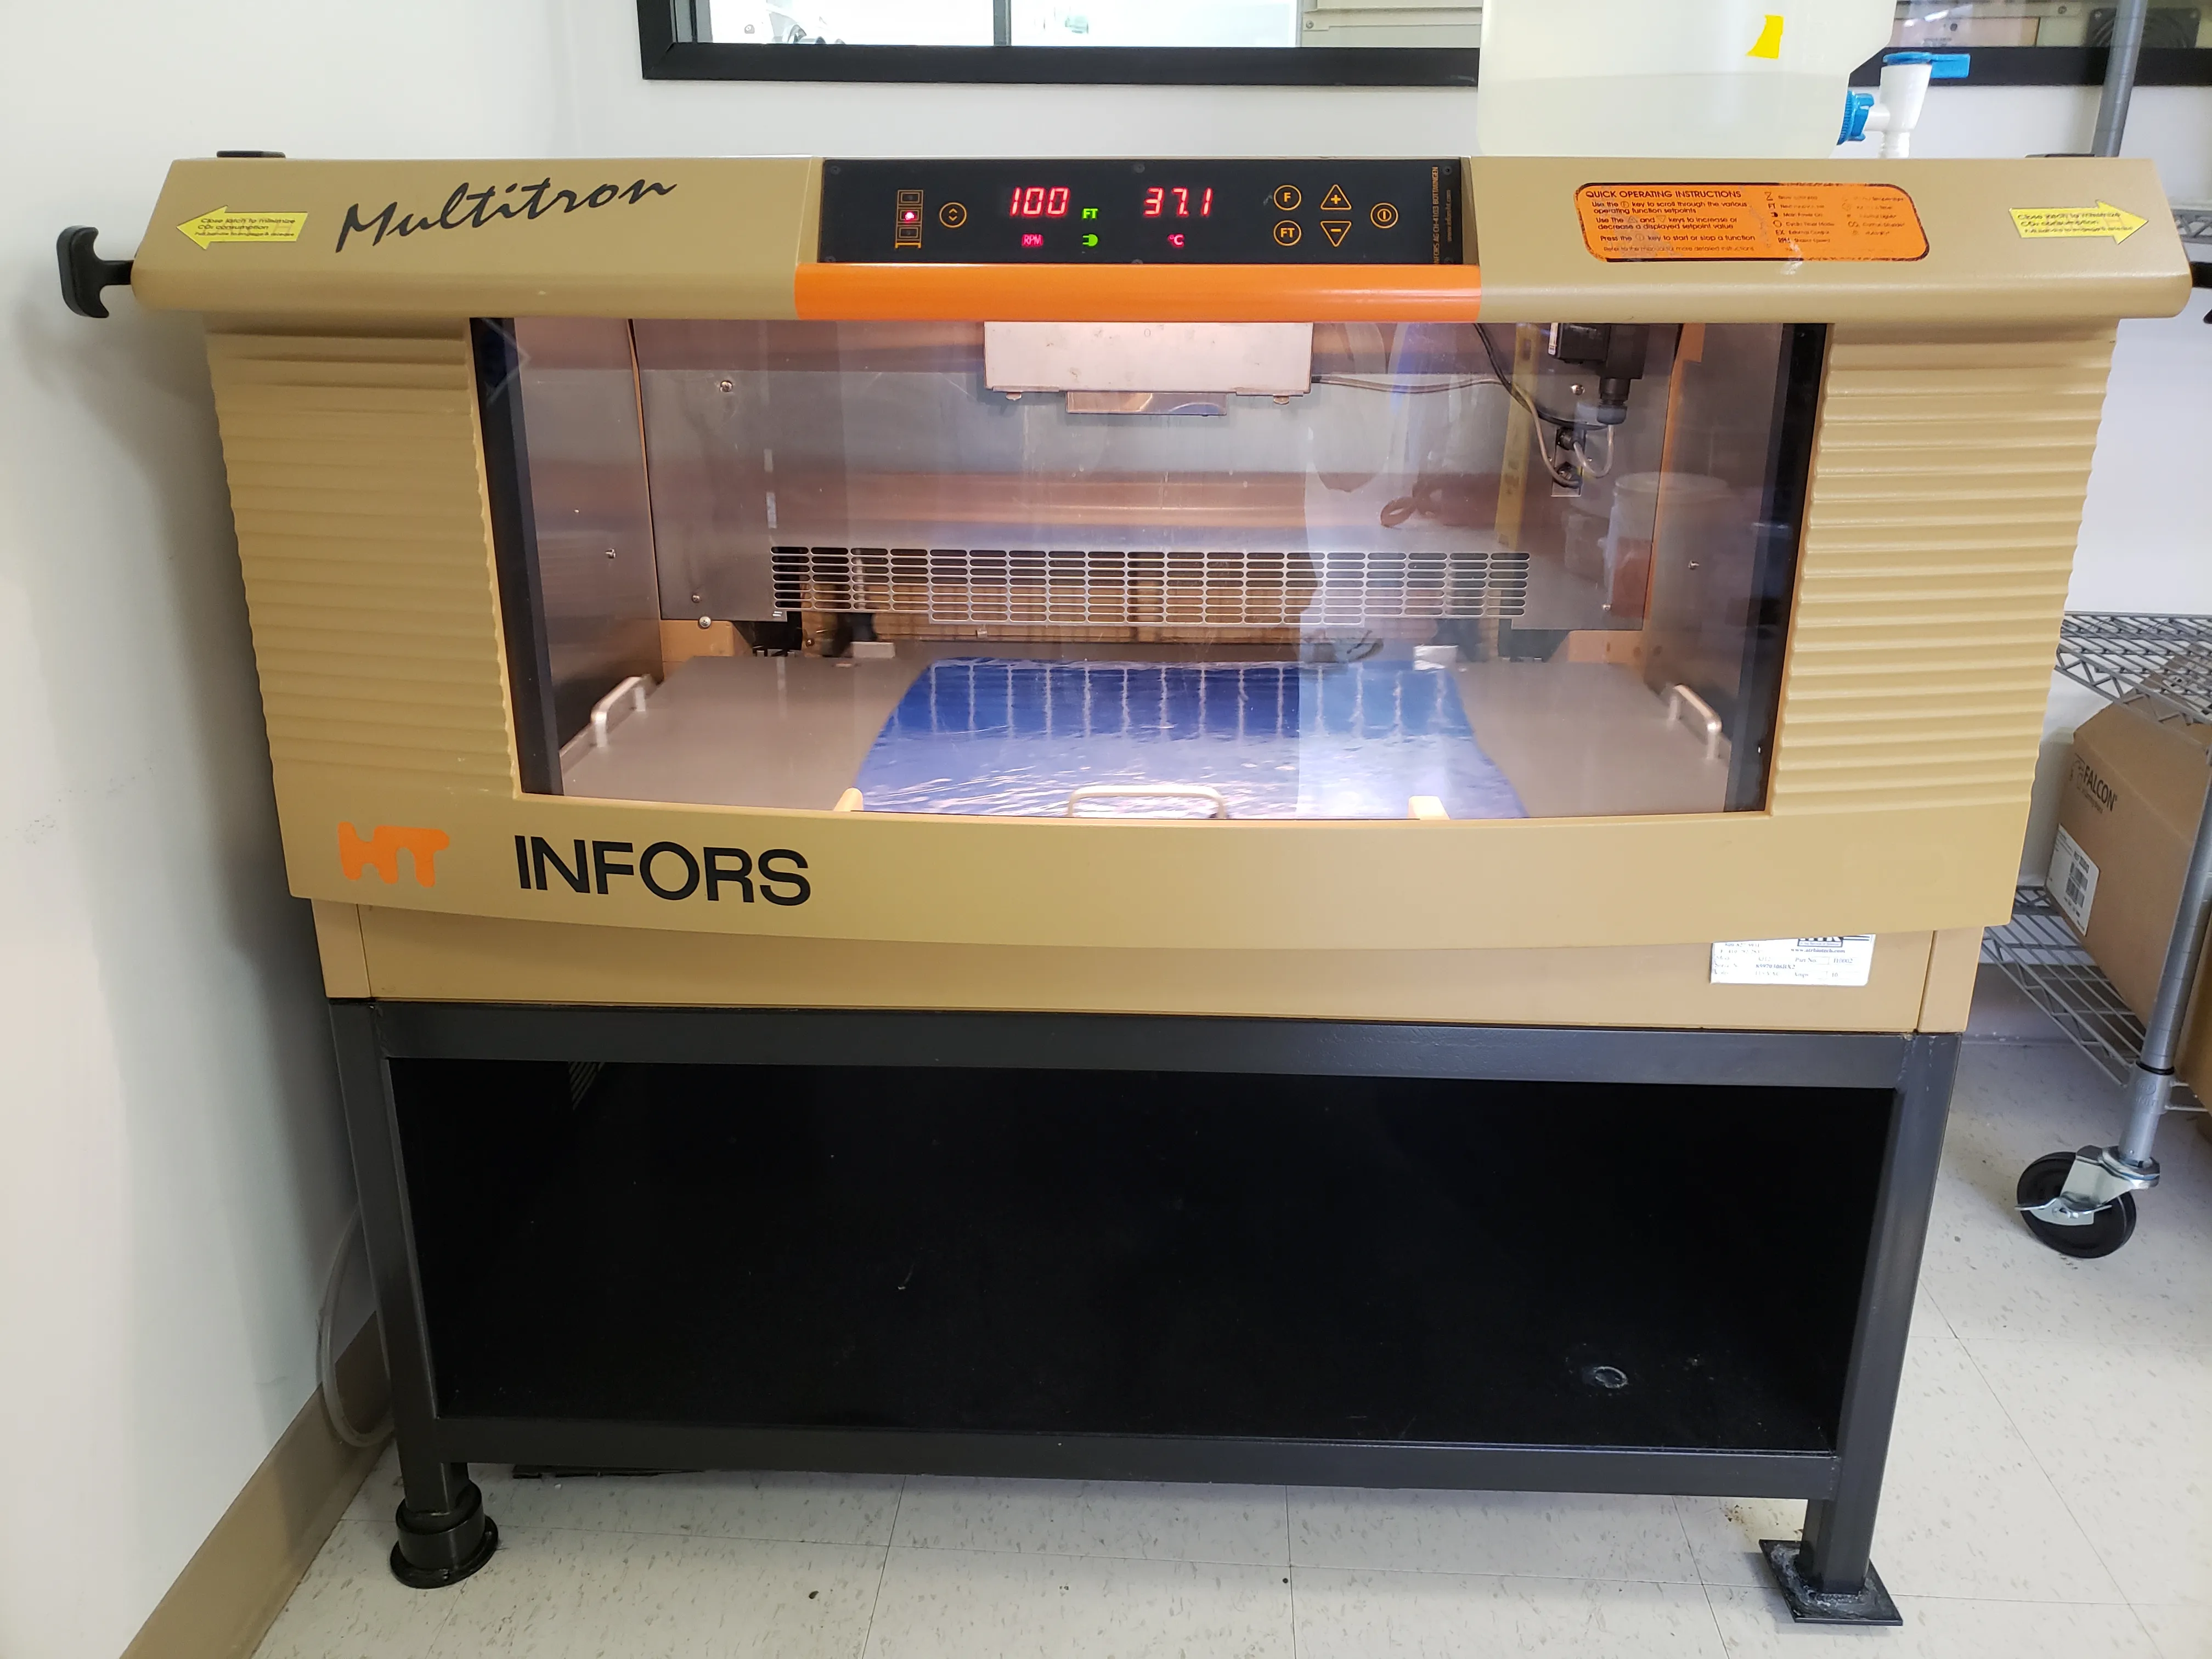 Infors HT Multitron Incubator Shaker with CO2 control - $5500